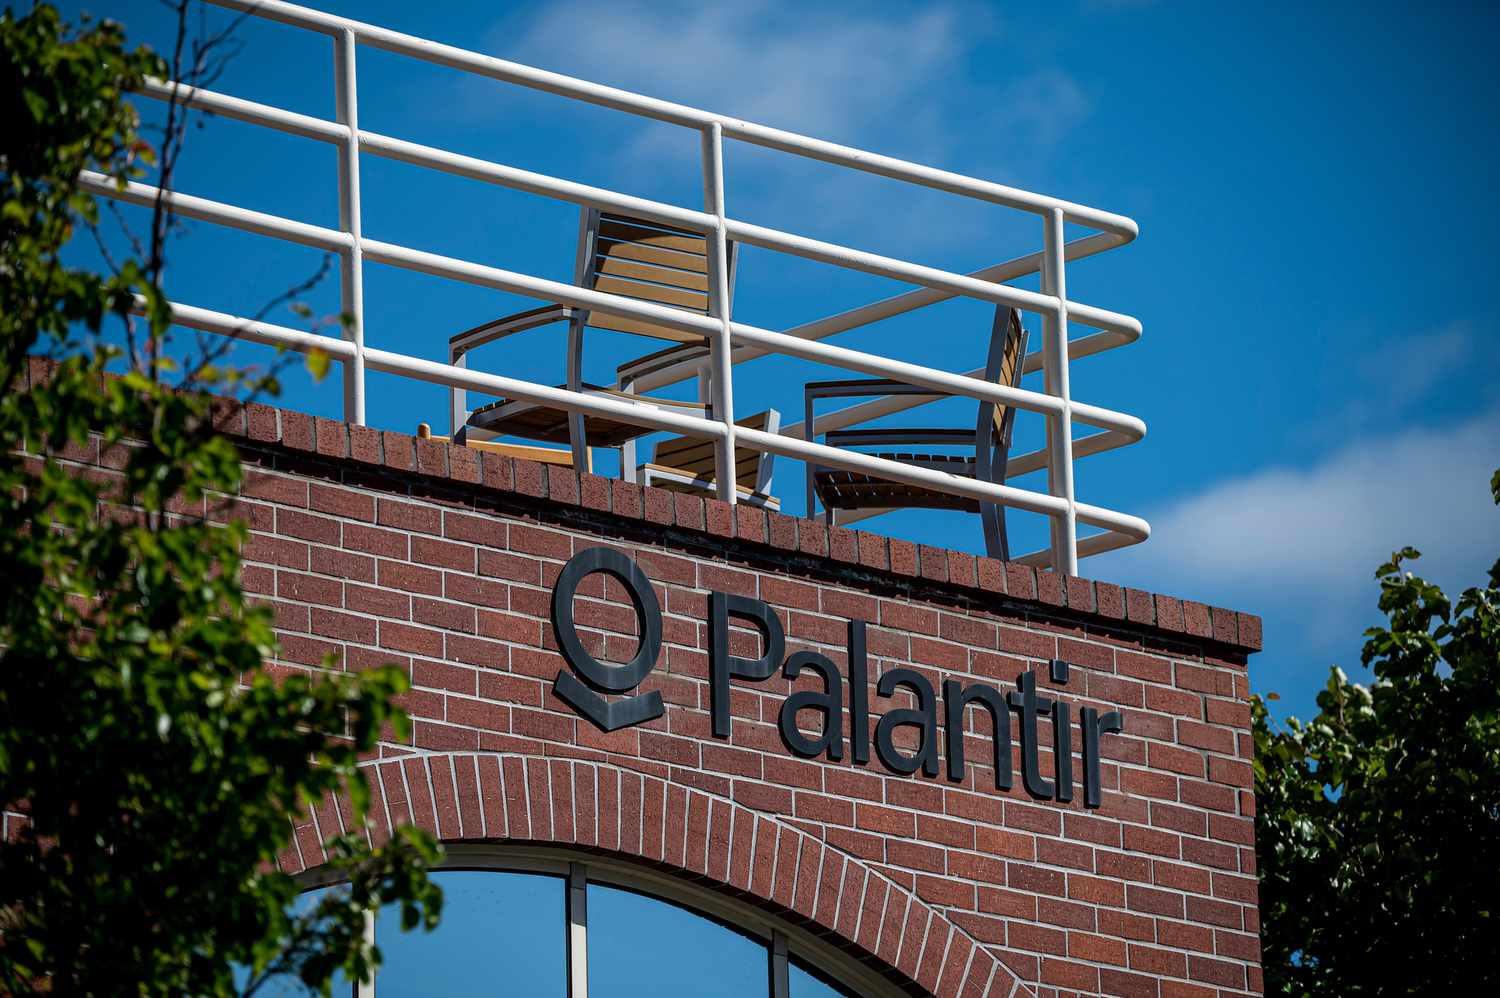 What You Need To Know Ahead of Palantir’s Earnings Report Monday [Video]